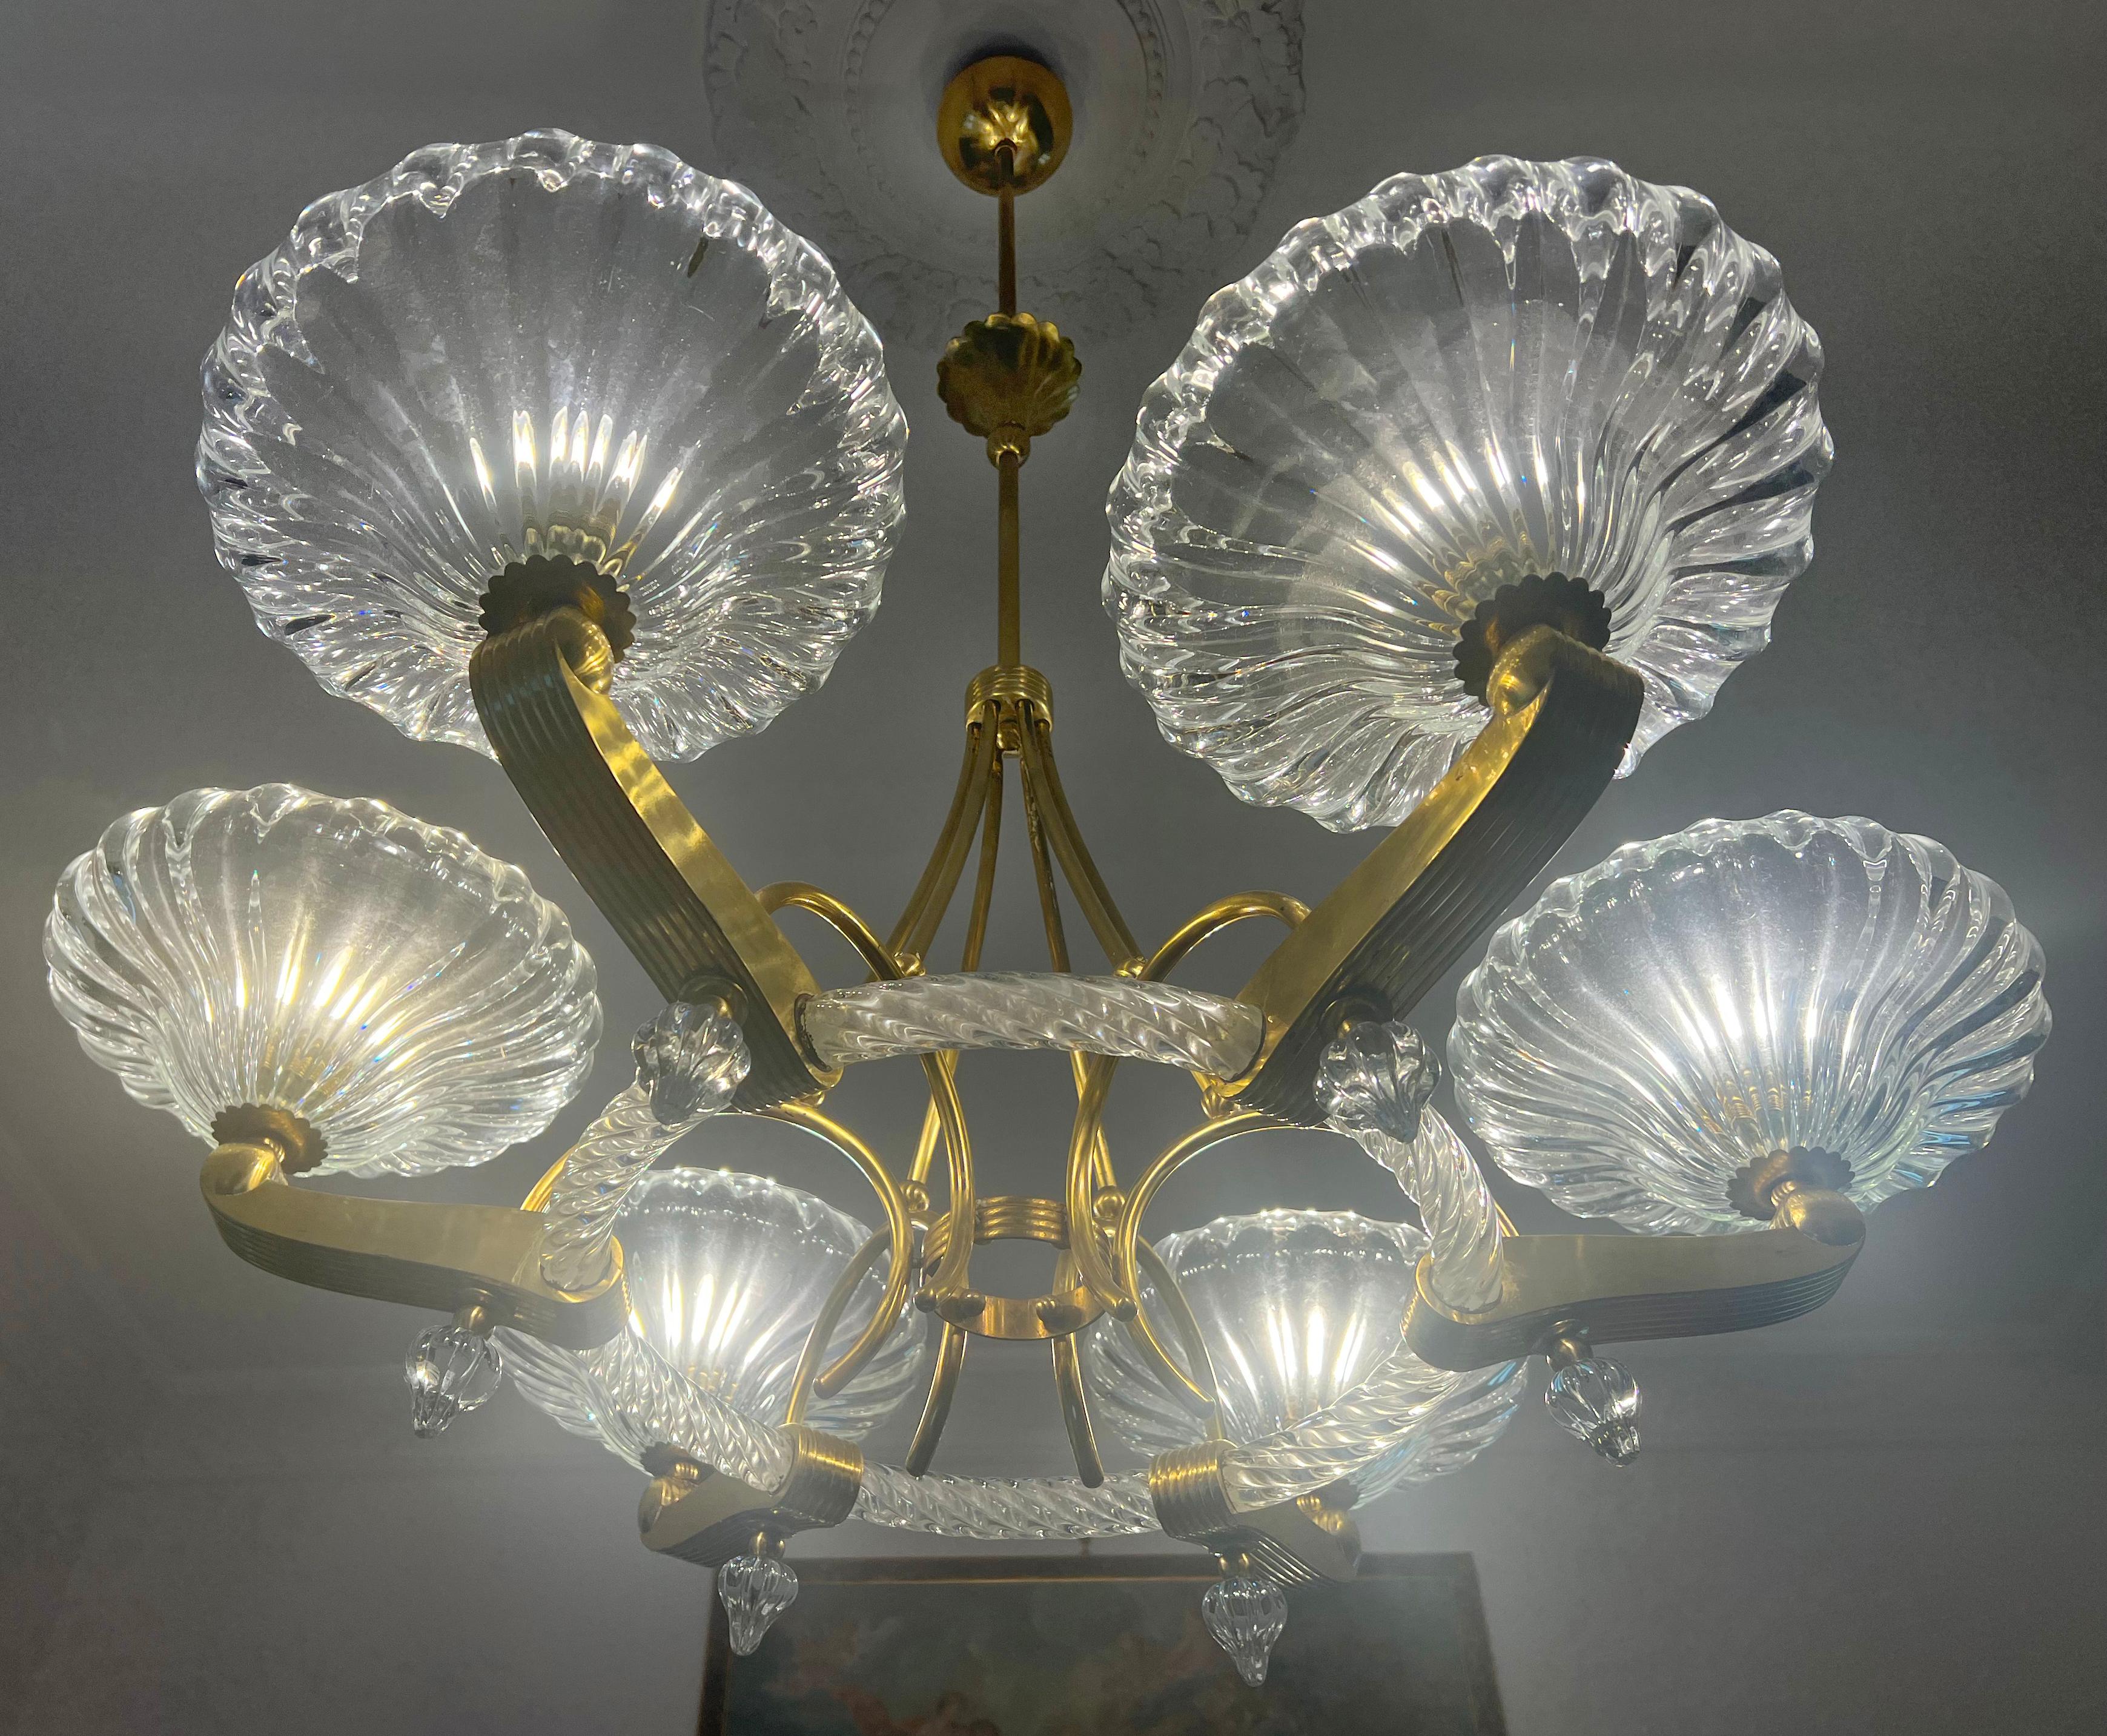 Extraordinary 6-cup chandelier from the renowned Murano artistic glassworks. From the personal collection of Baron Von Planta.